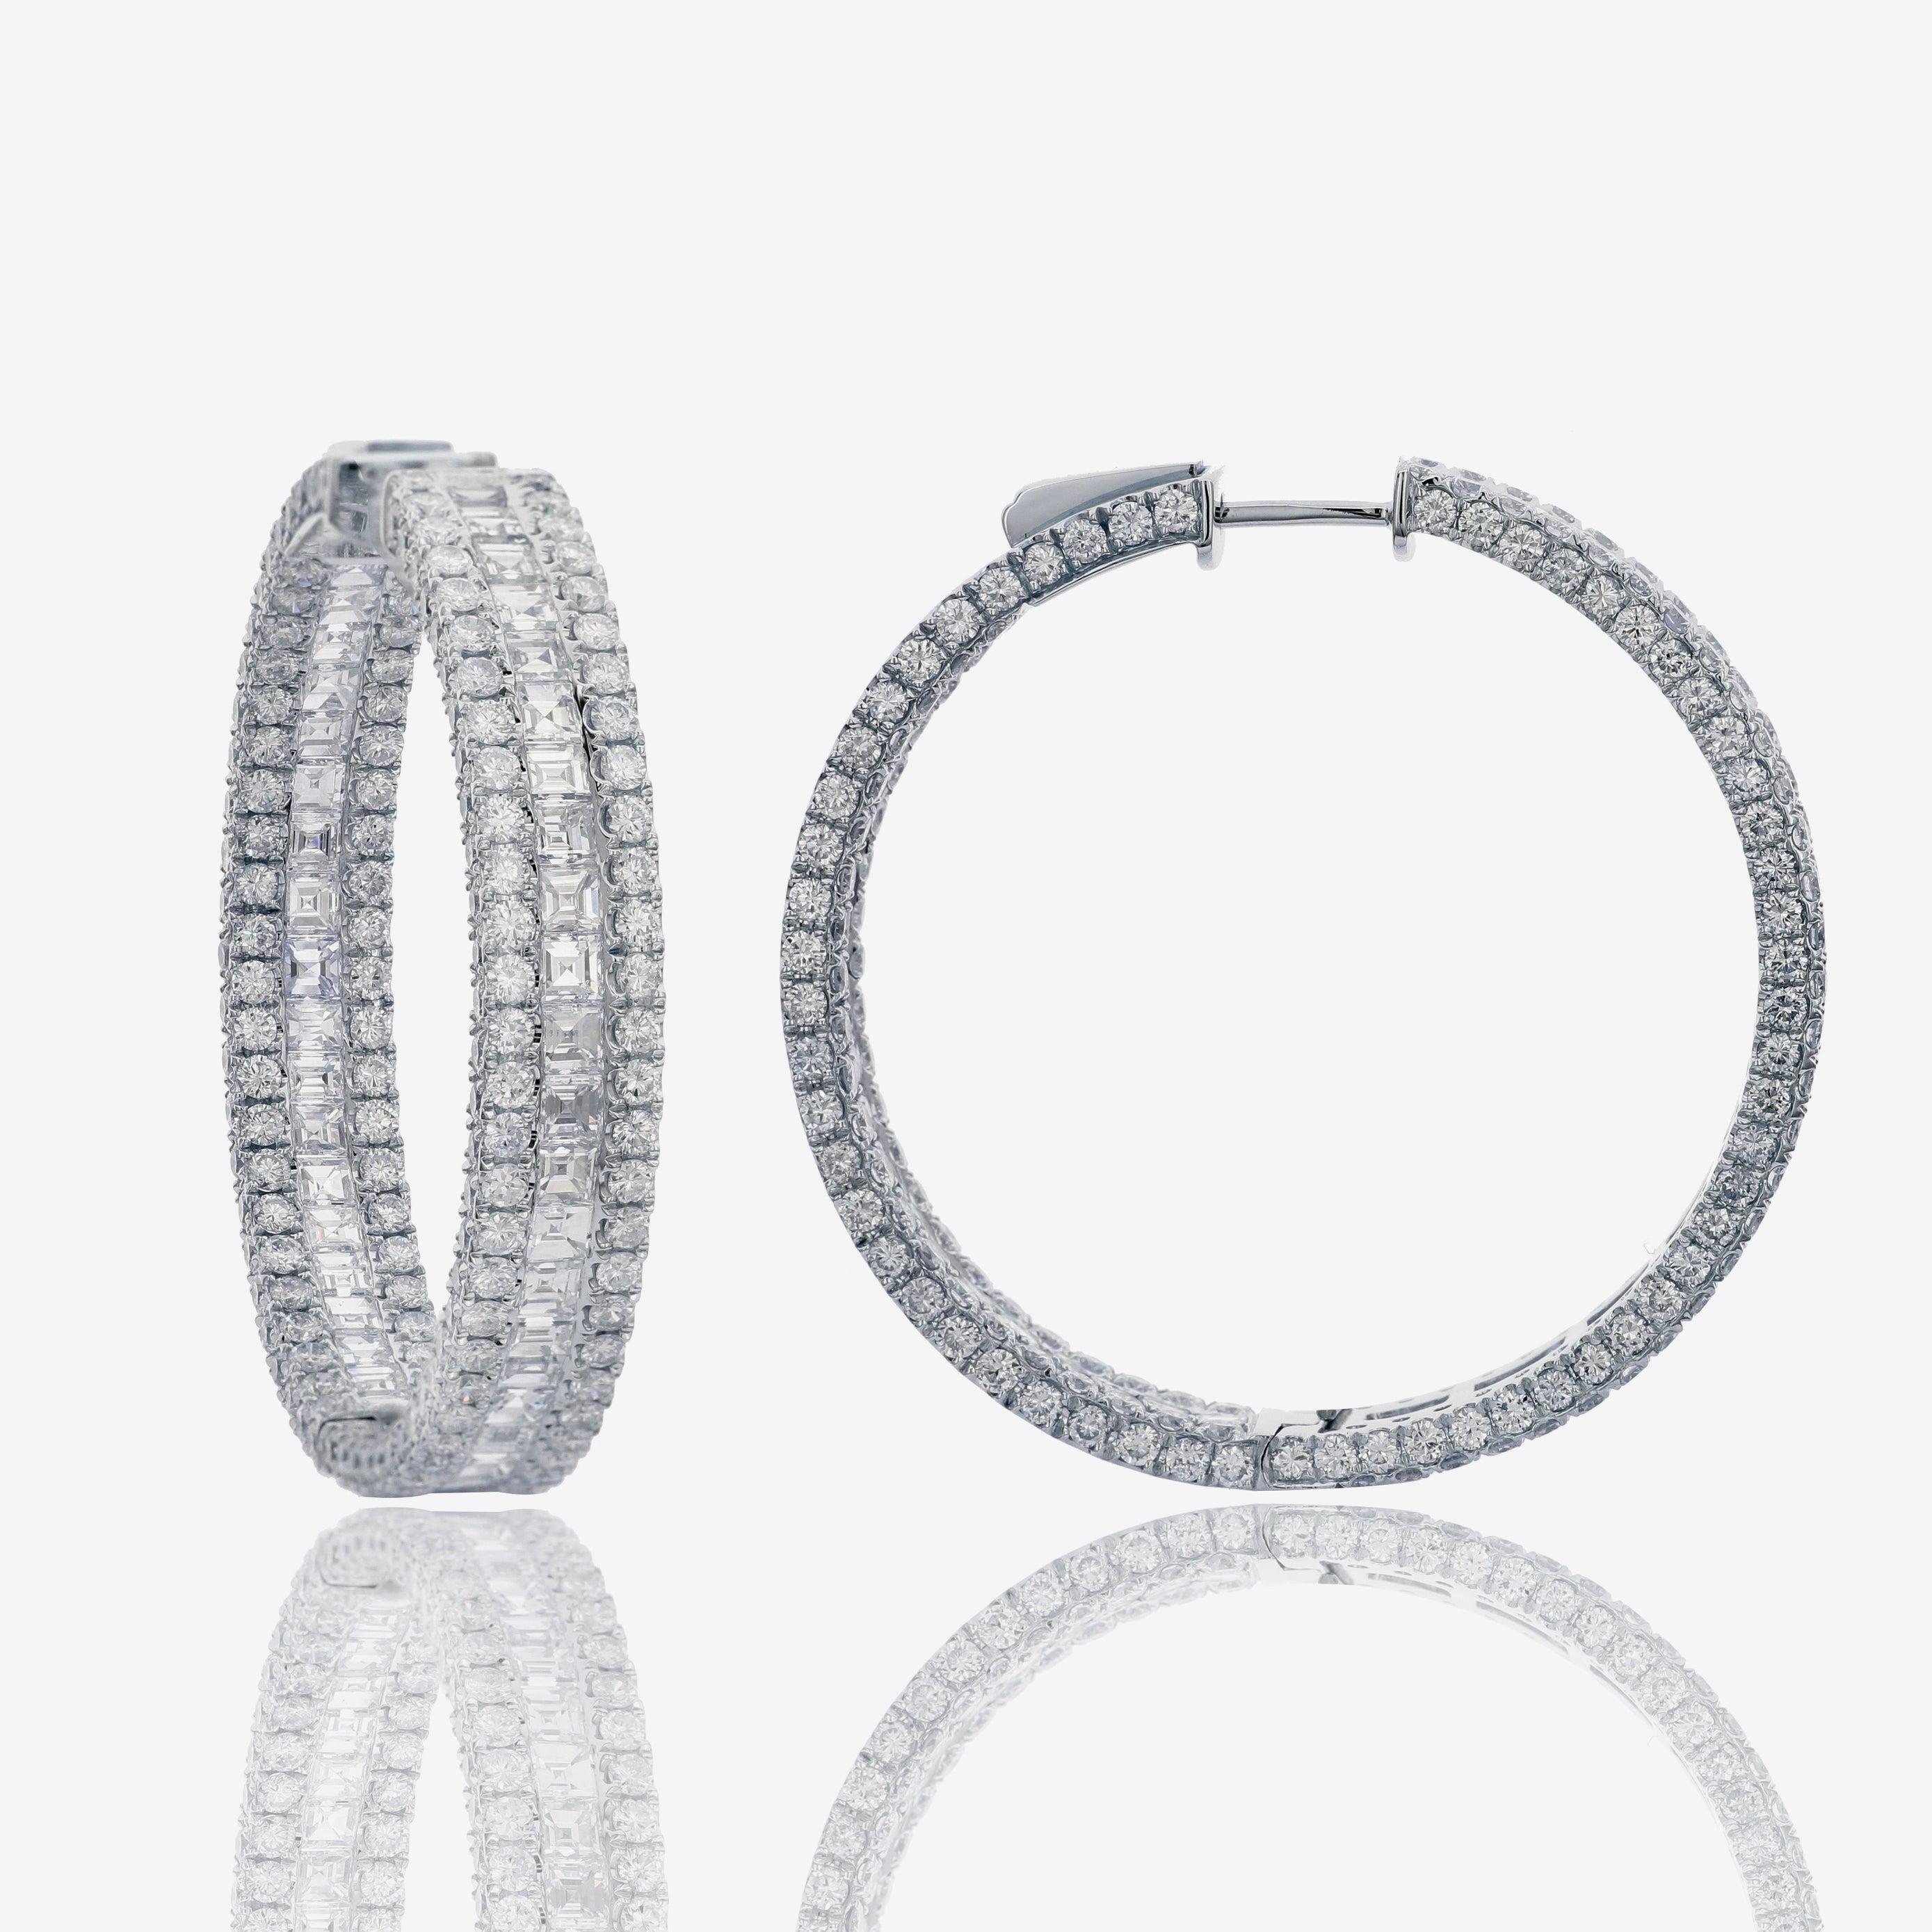 These stunning inside-out hoop earrings feature 13.34 carats of sparkling princess and round diamonds.  A total of 406 diamonds of VS-SI clarity and G-H color.  Set in 18k white gold. Fine craftsmanship, even better in person.

